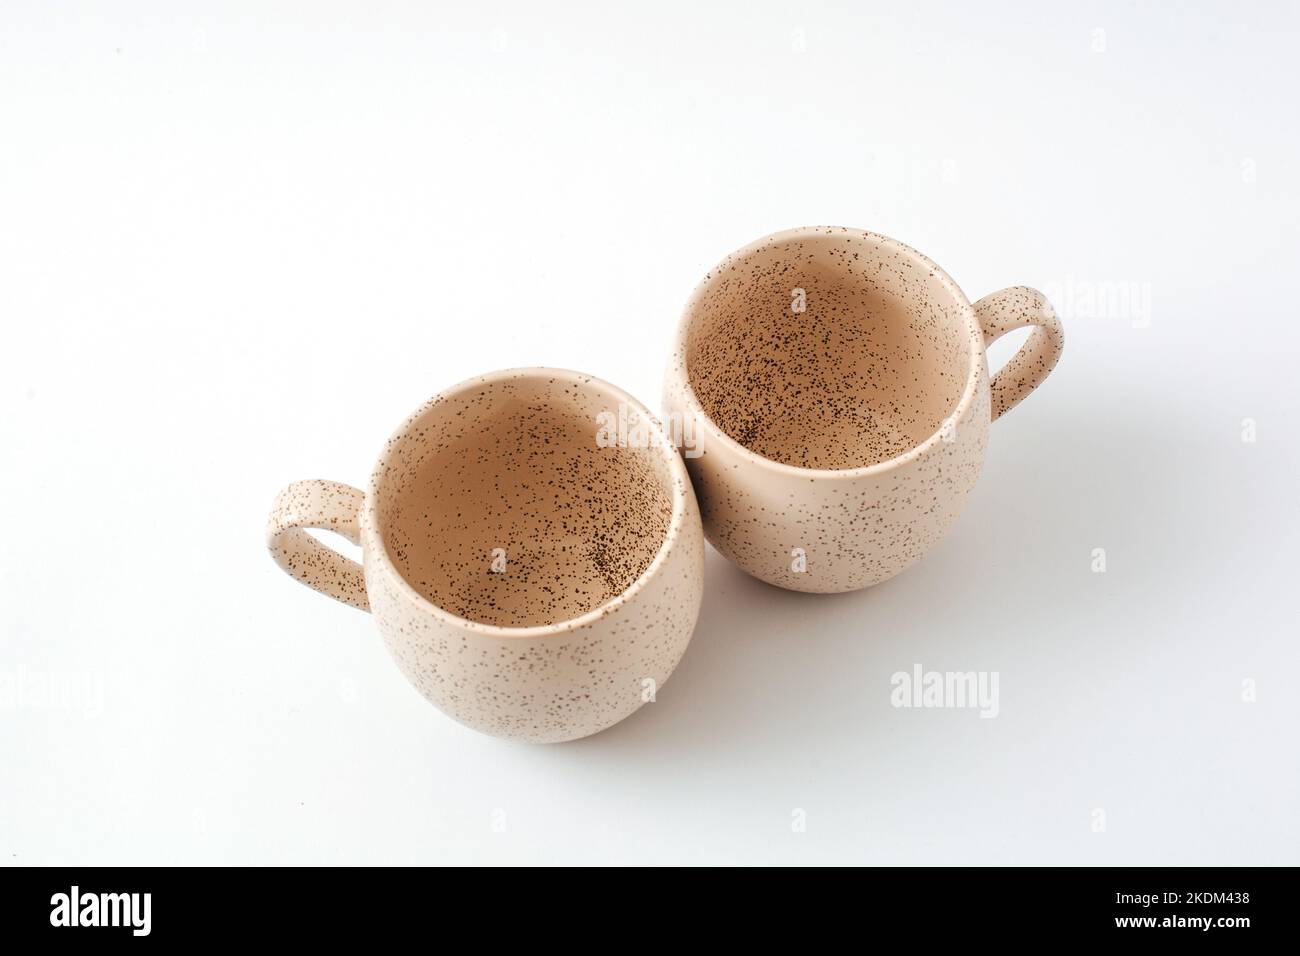 Beige coffee cups. View from above. Isolated on white background, cut out.  Stock Photo